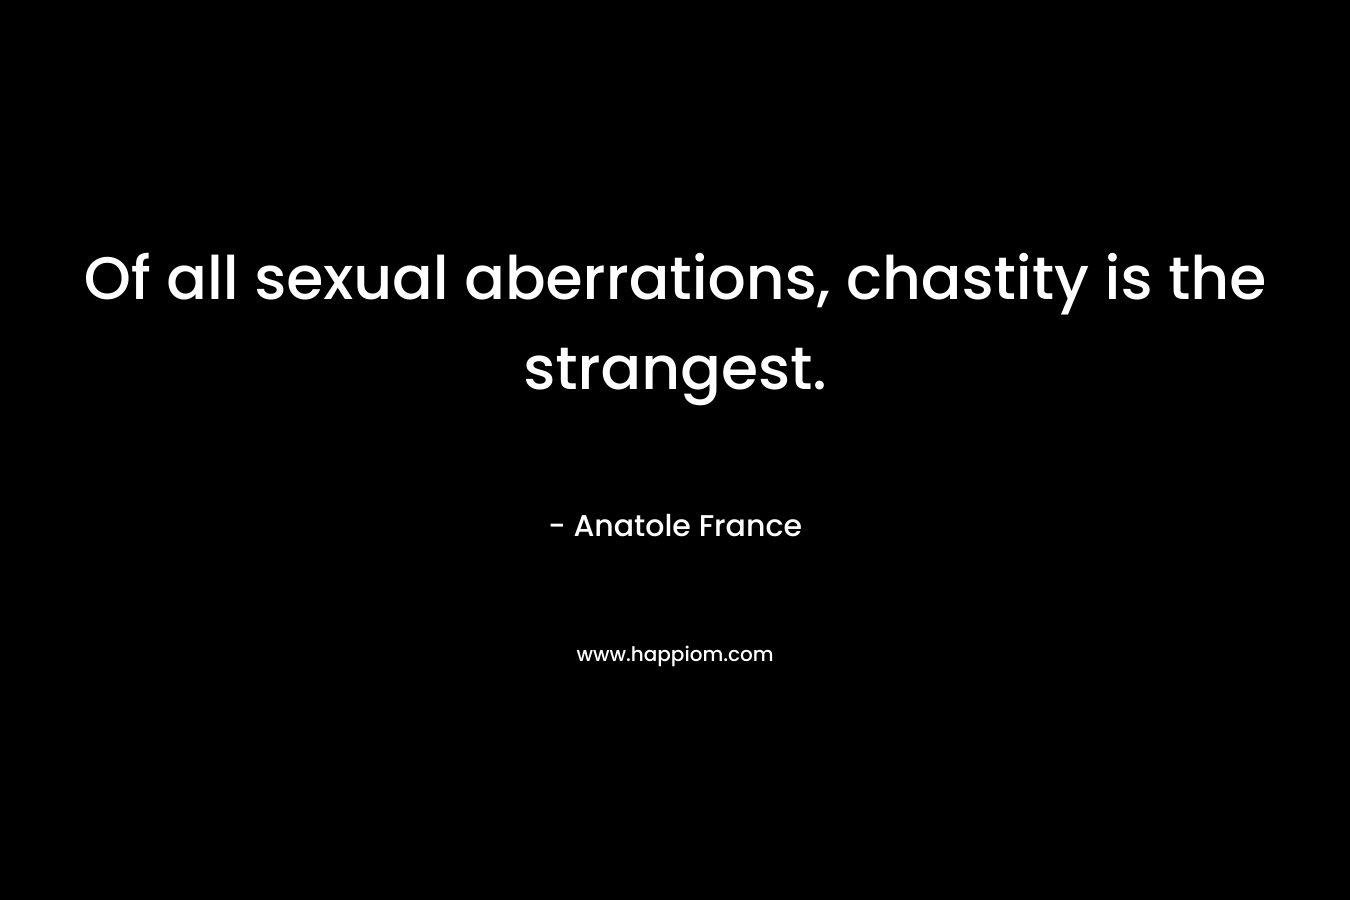 Of all sexual aberrations, chastity is the strangest.